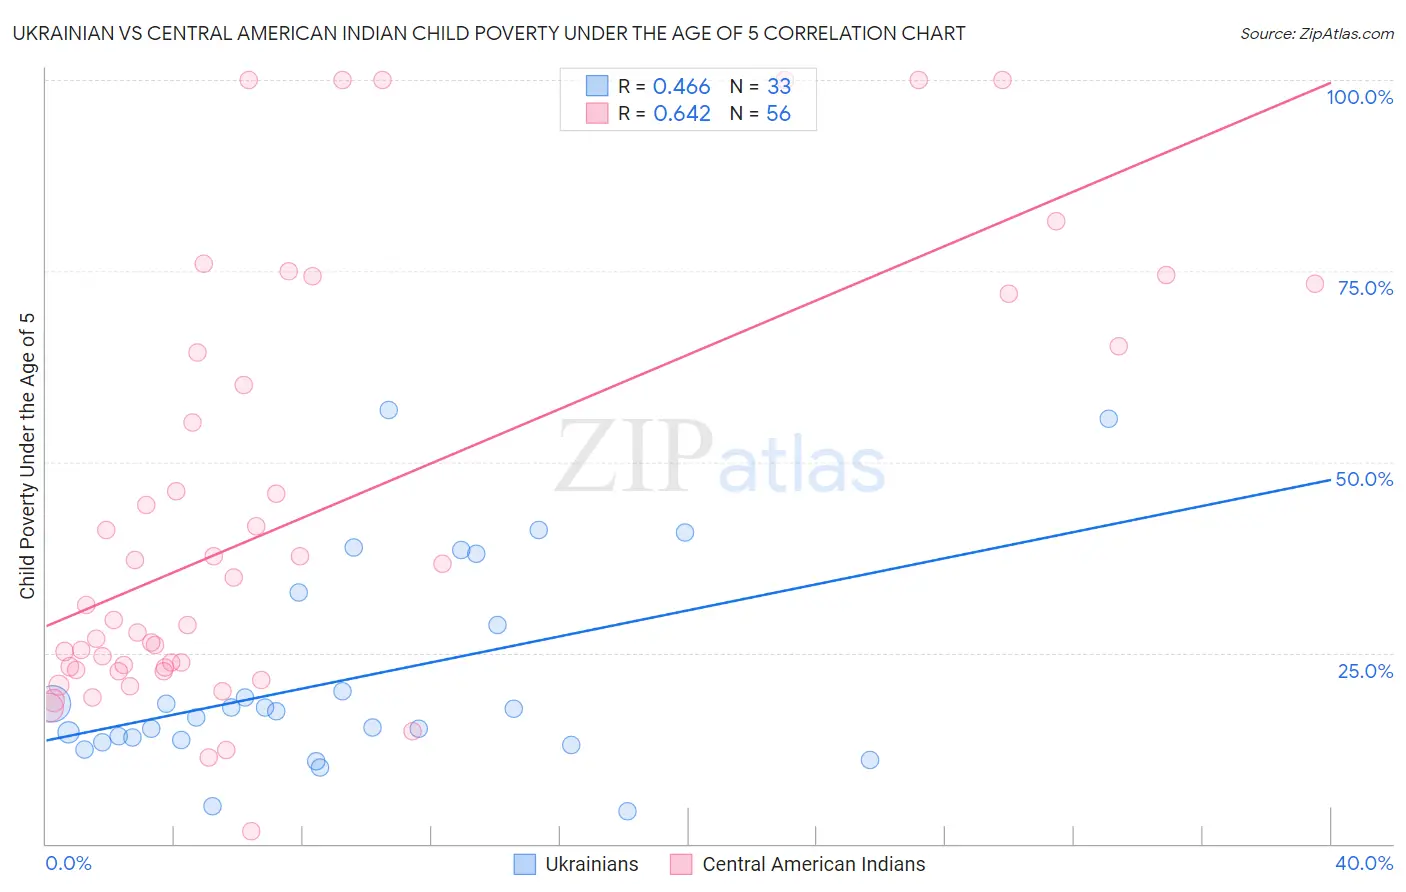 Ukrainian vs Central American Indian Child Poverty Under the Age of 5